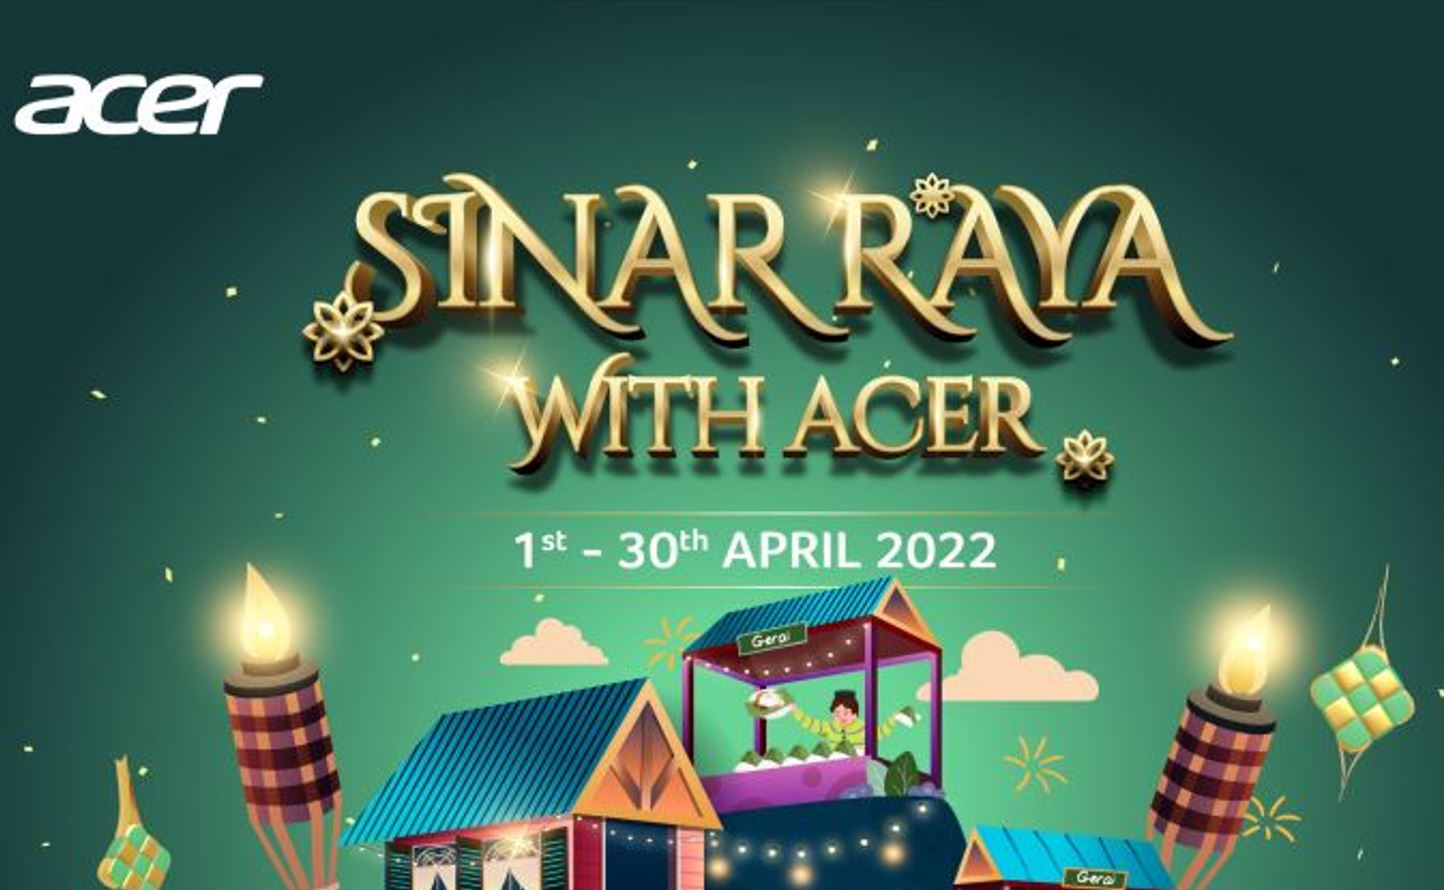 sinar-raya-with-acer-offers-tempting-rebates-and-new-monitor-line-up